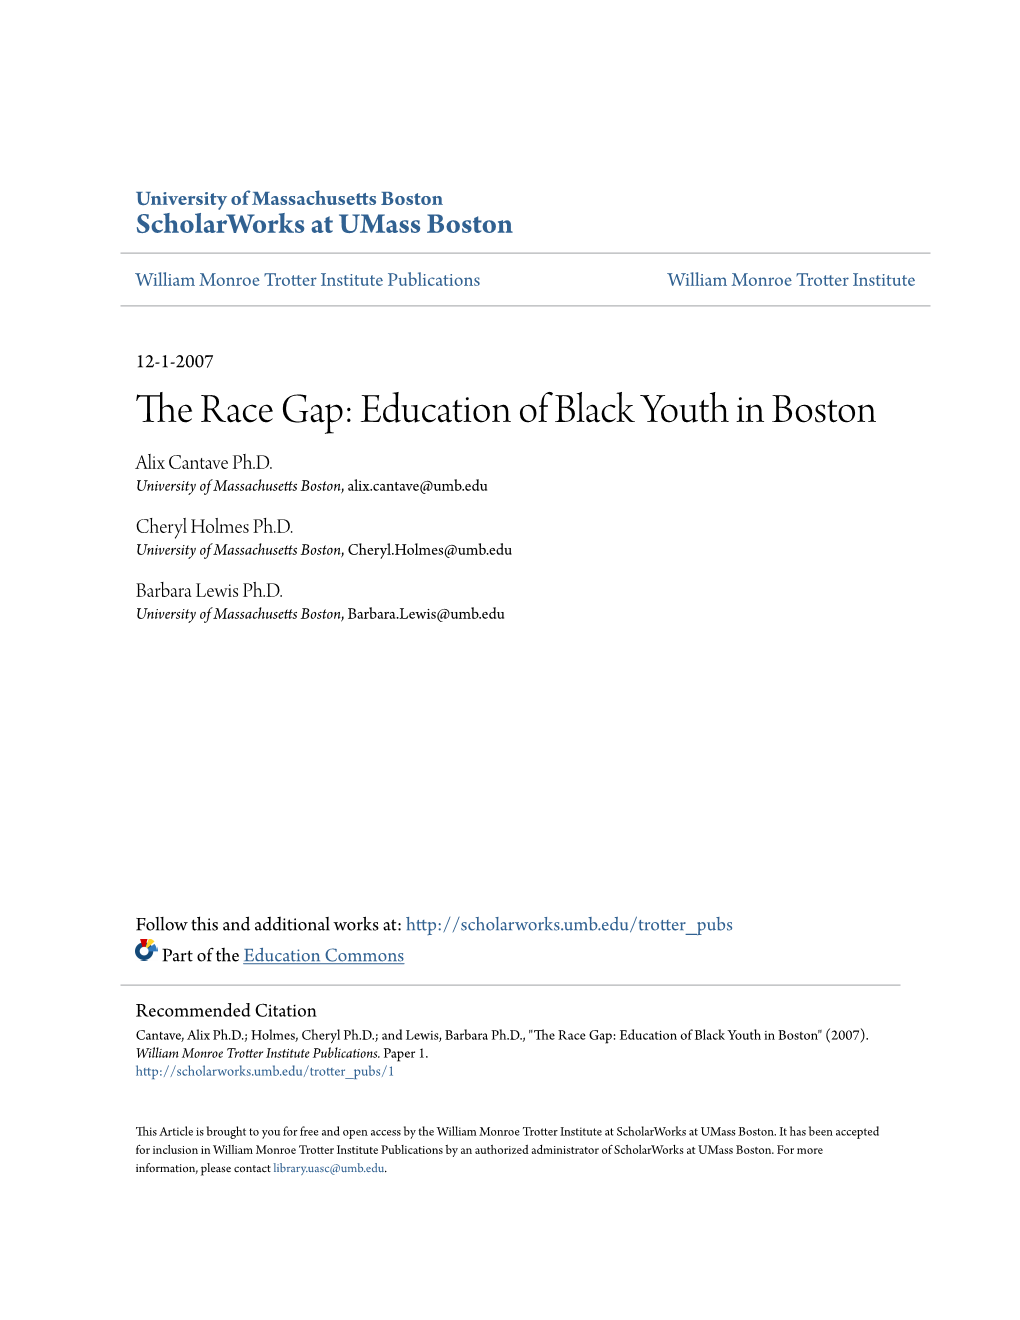 The Race Gap: Education of Black Youth in Boston Alix Cantave Ph.D